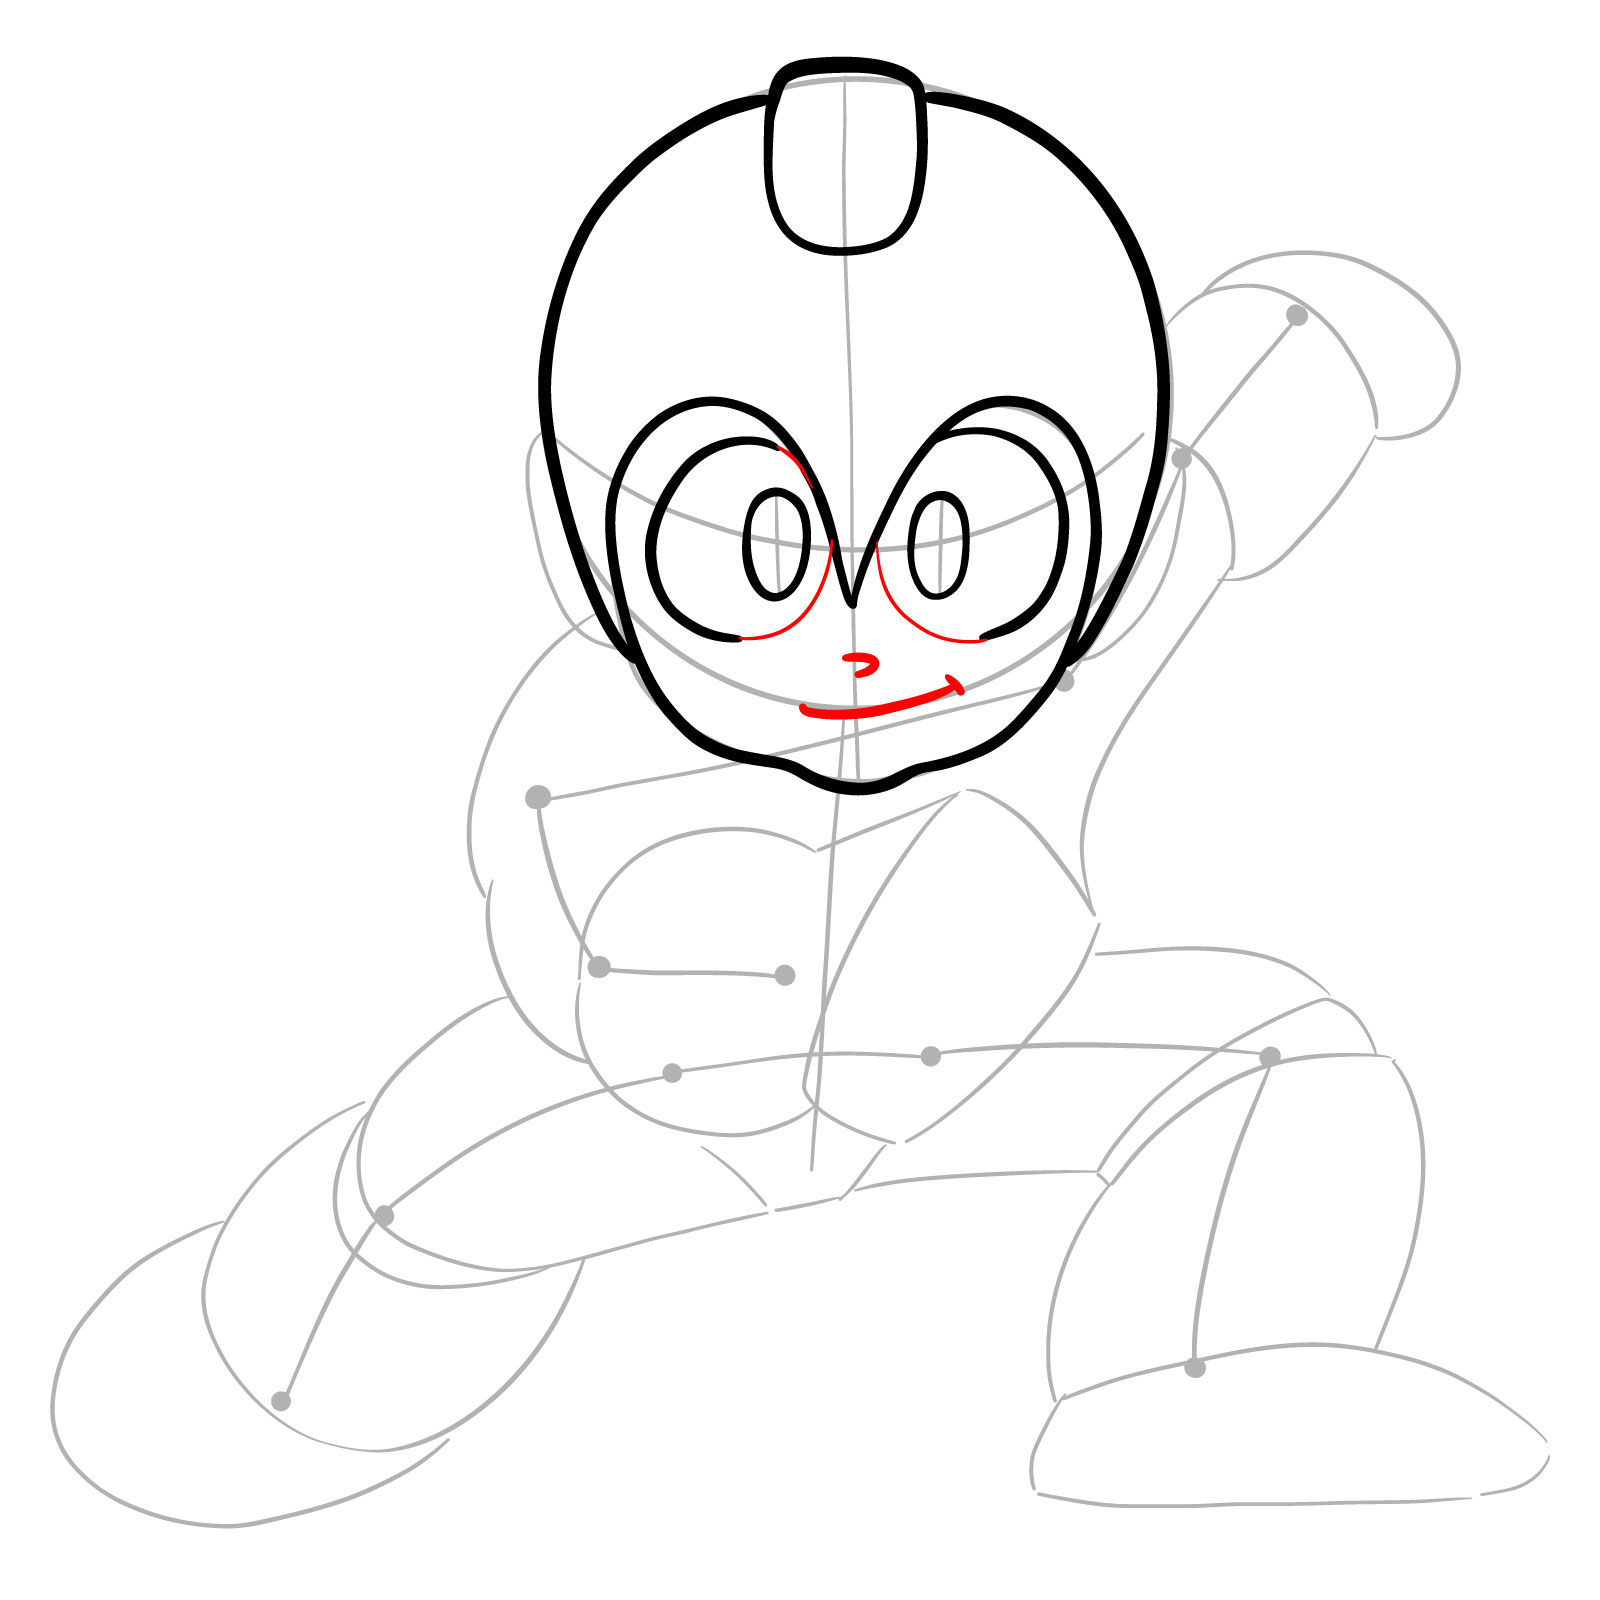 How to draw Mega Man from the original game - step 08